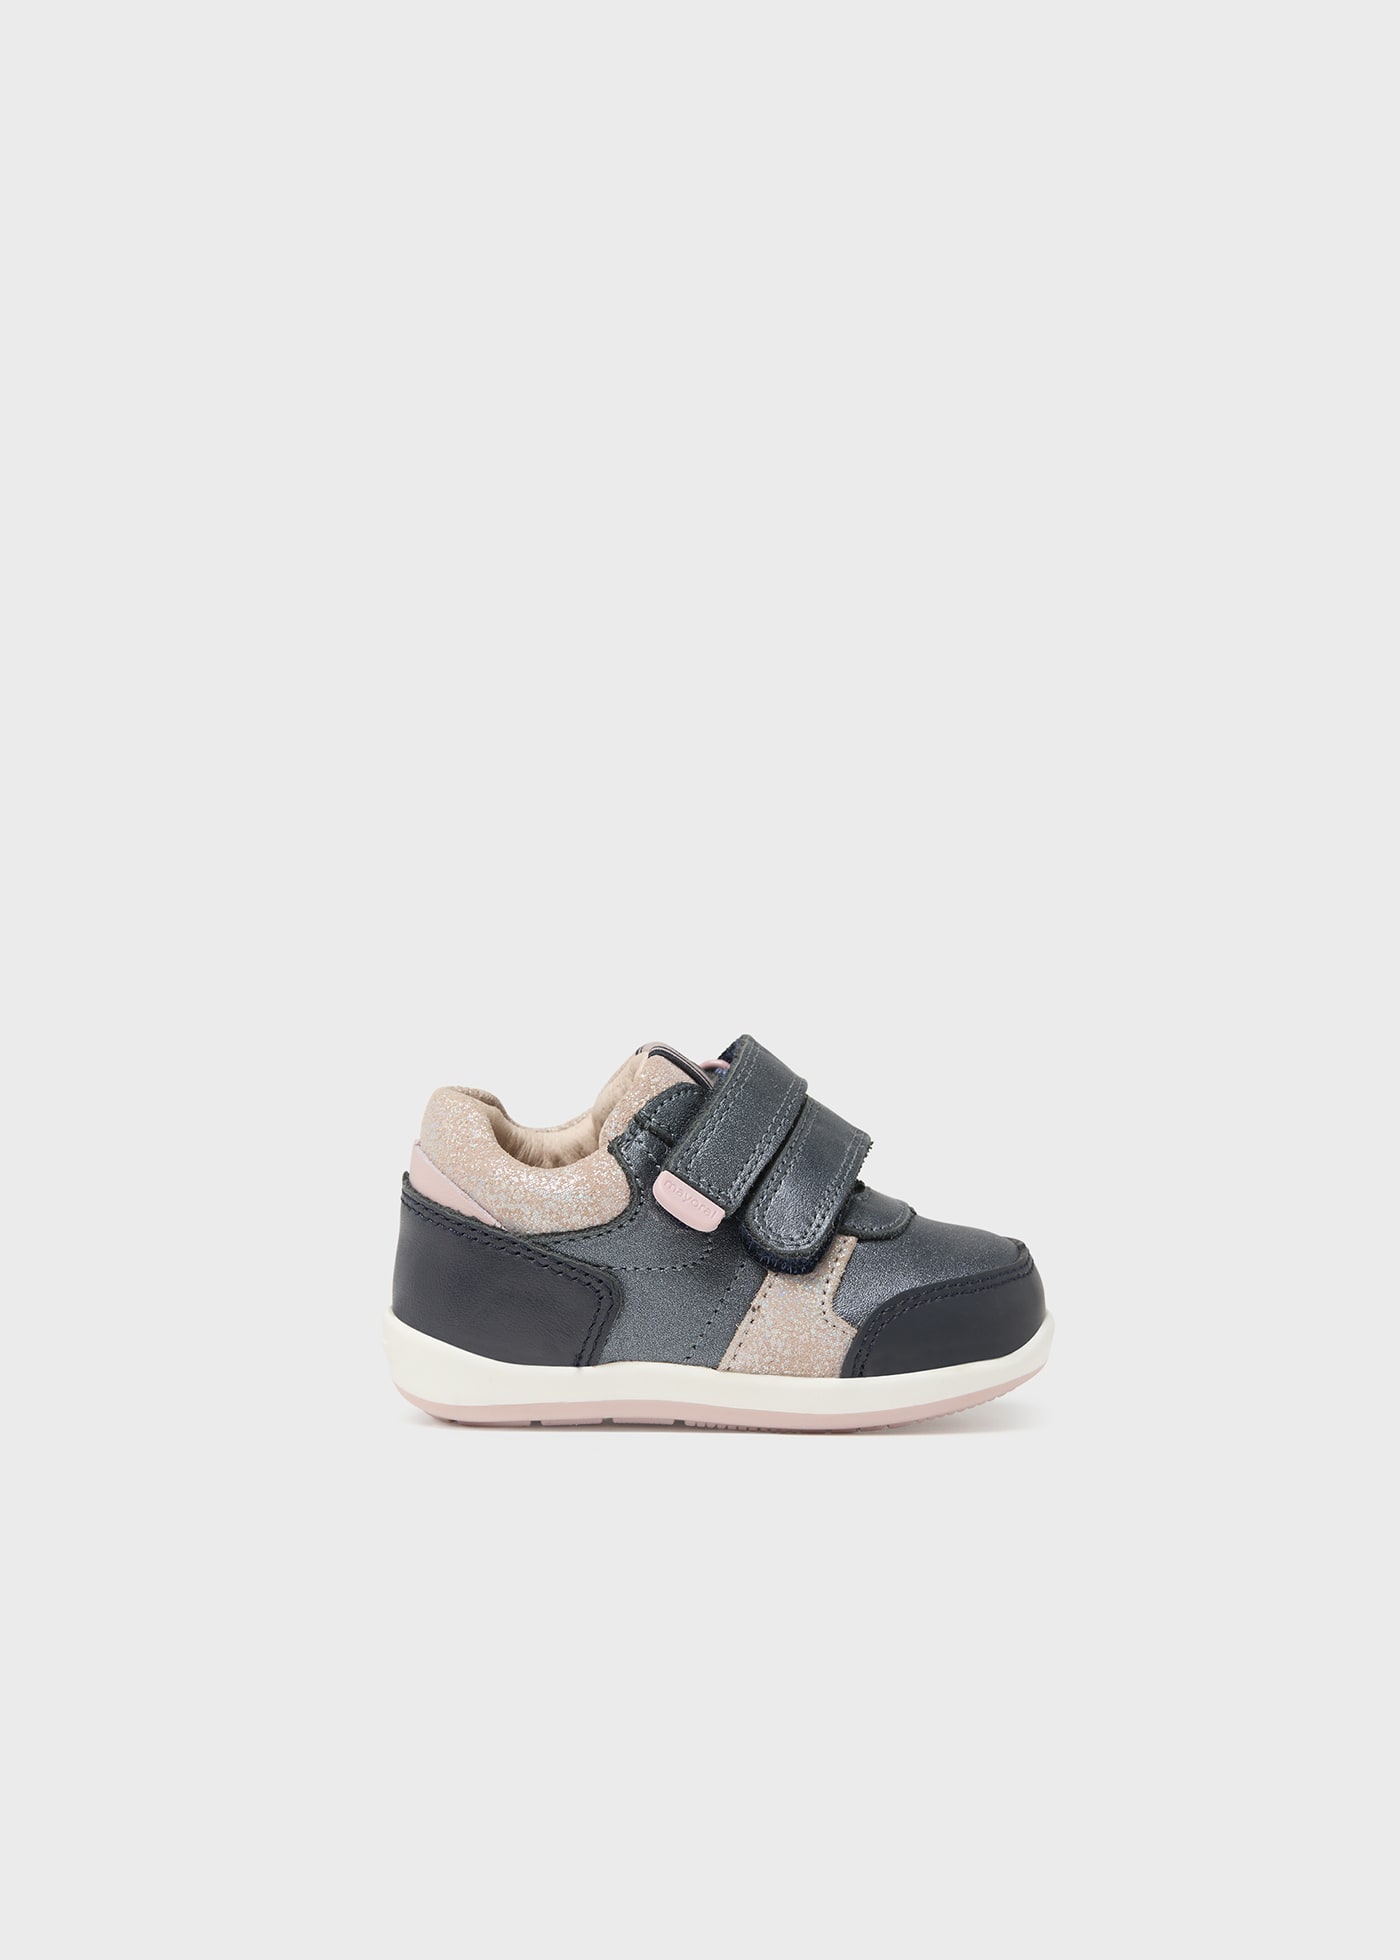 Multicolor sneakers sustainable leather baby